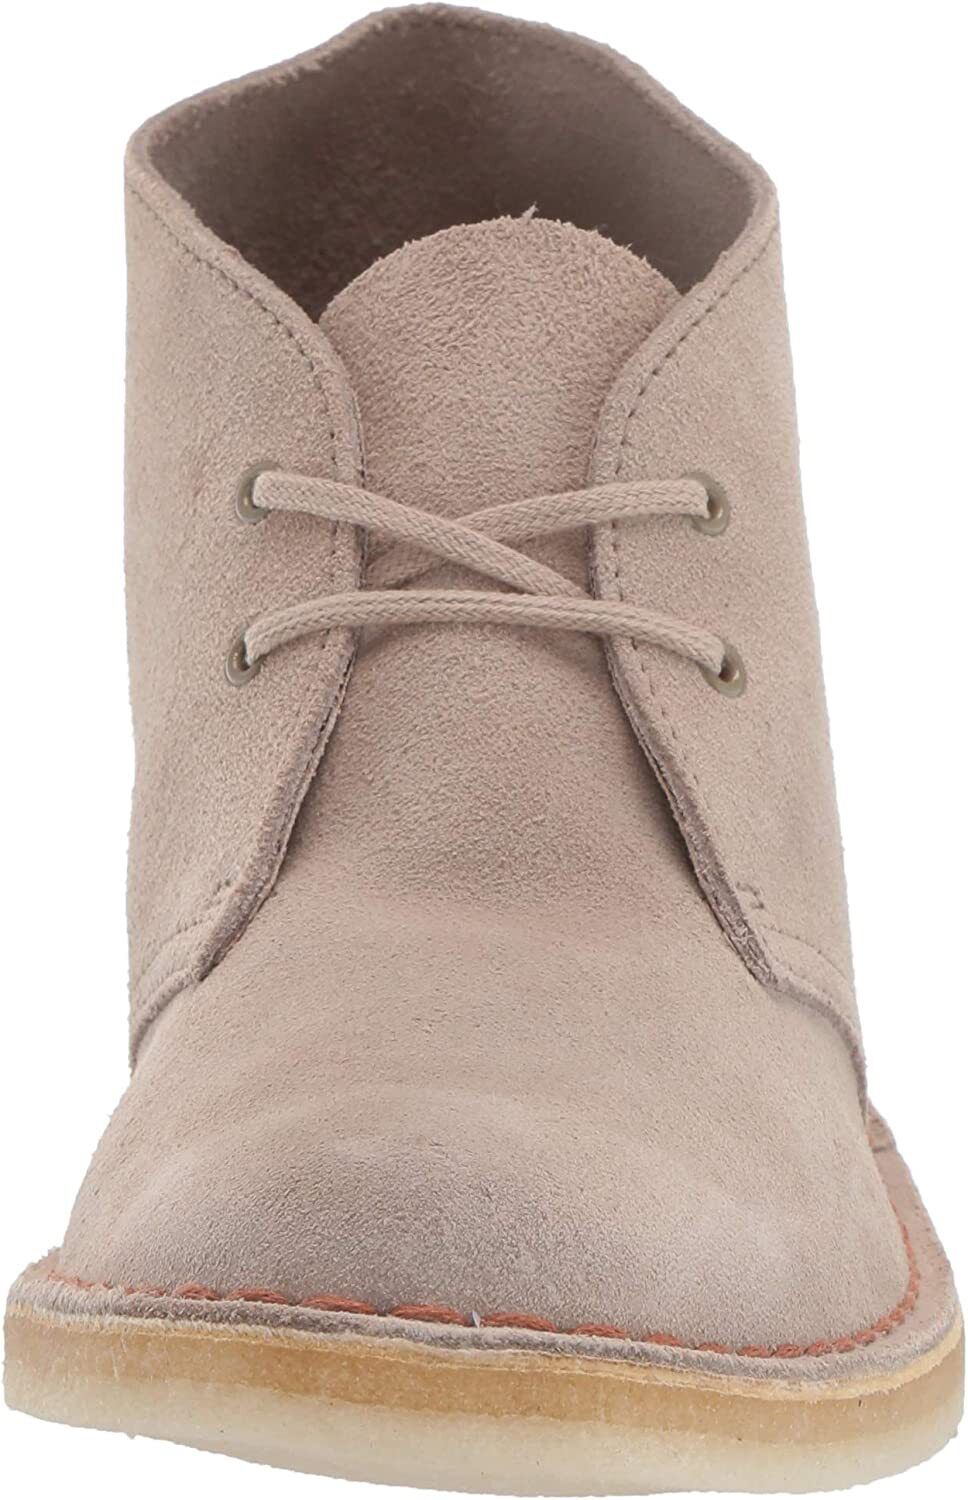  Pair of Clarks Women's Desert Boot Sand Suede from the side